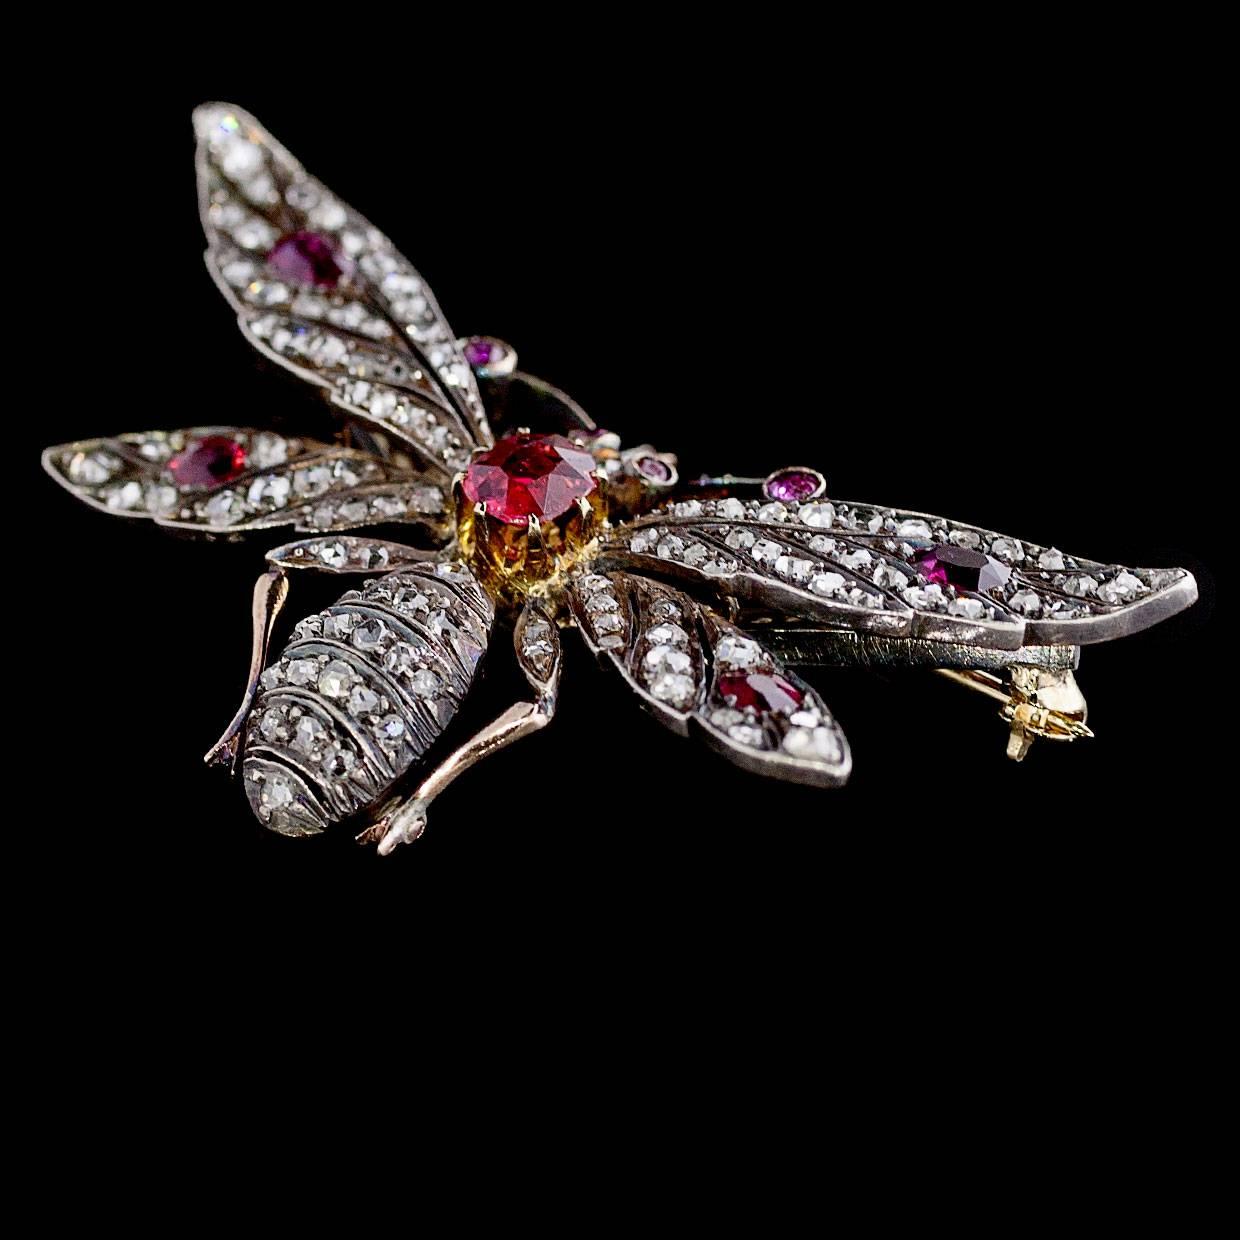 Add a little sting & sparkle to your look with this beautiful, unique antique ruby & diamond brooch! It features an over 1 carat, oval cut ruby with luscious red color that is prong set in yellow gold in the center of the bee. The antennae, wings,